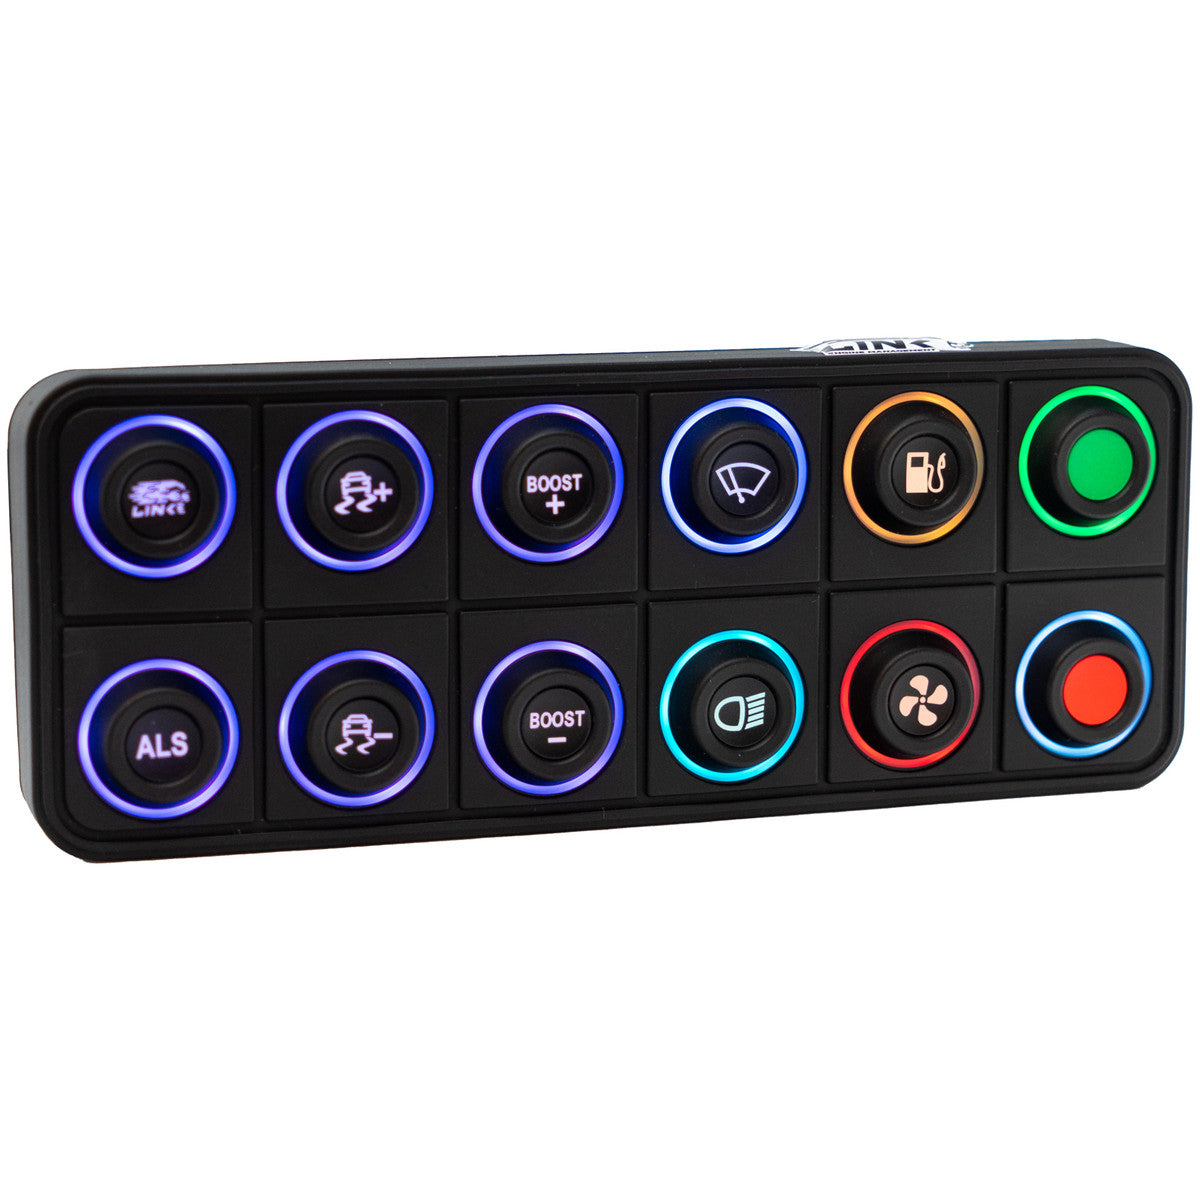 CAN Keypad 12 button